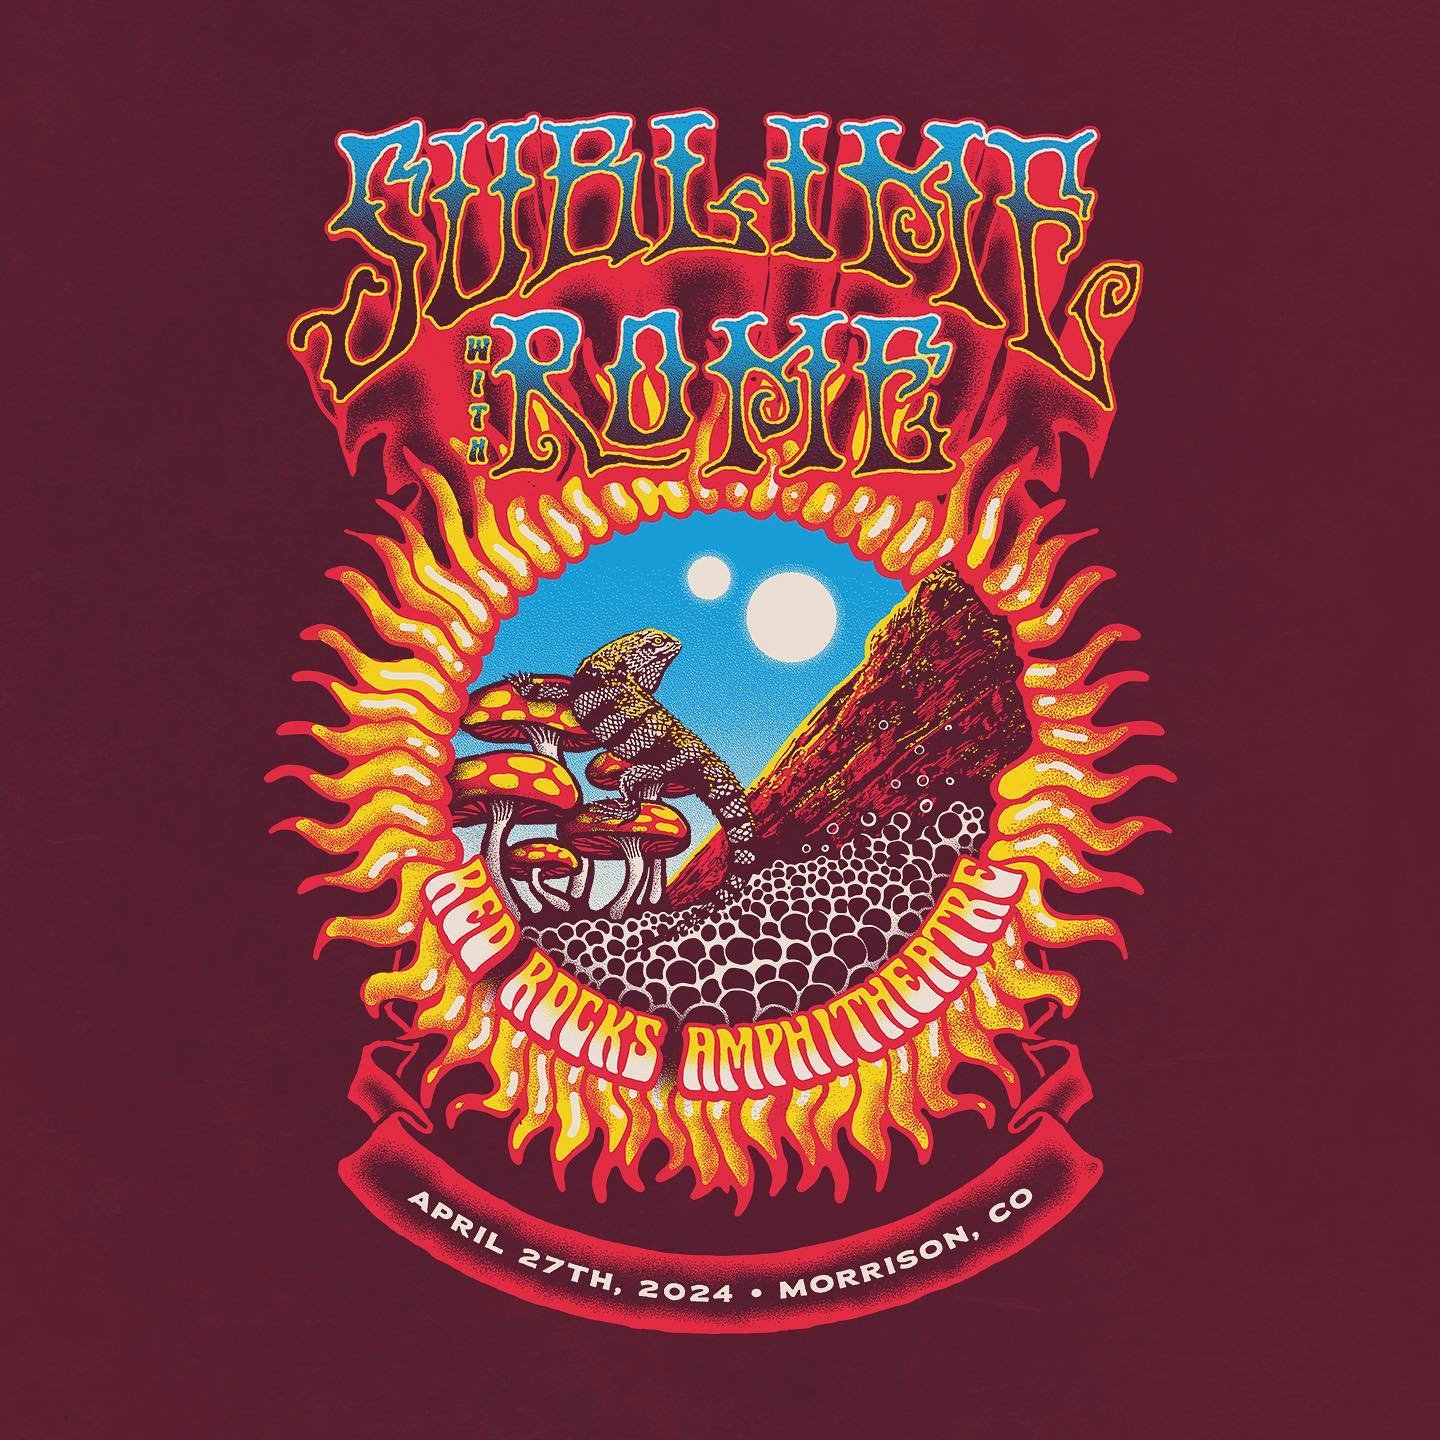 Excited to share this design I drew up for @sublimewithrome and their show at Red Rocks a few weekends ago.

The good news: they sold-out at the show! Bad news: I was too slow and won&rsquo;t get a tee for myself.

I hope all who went enjoyed the sho